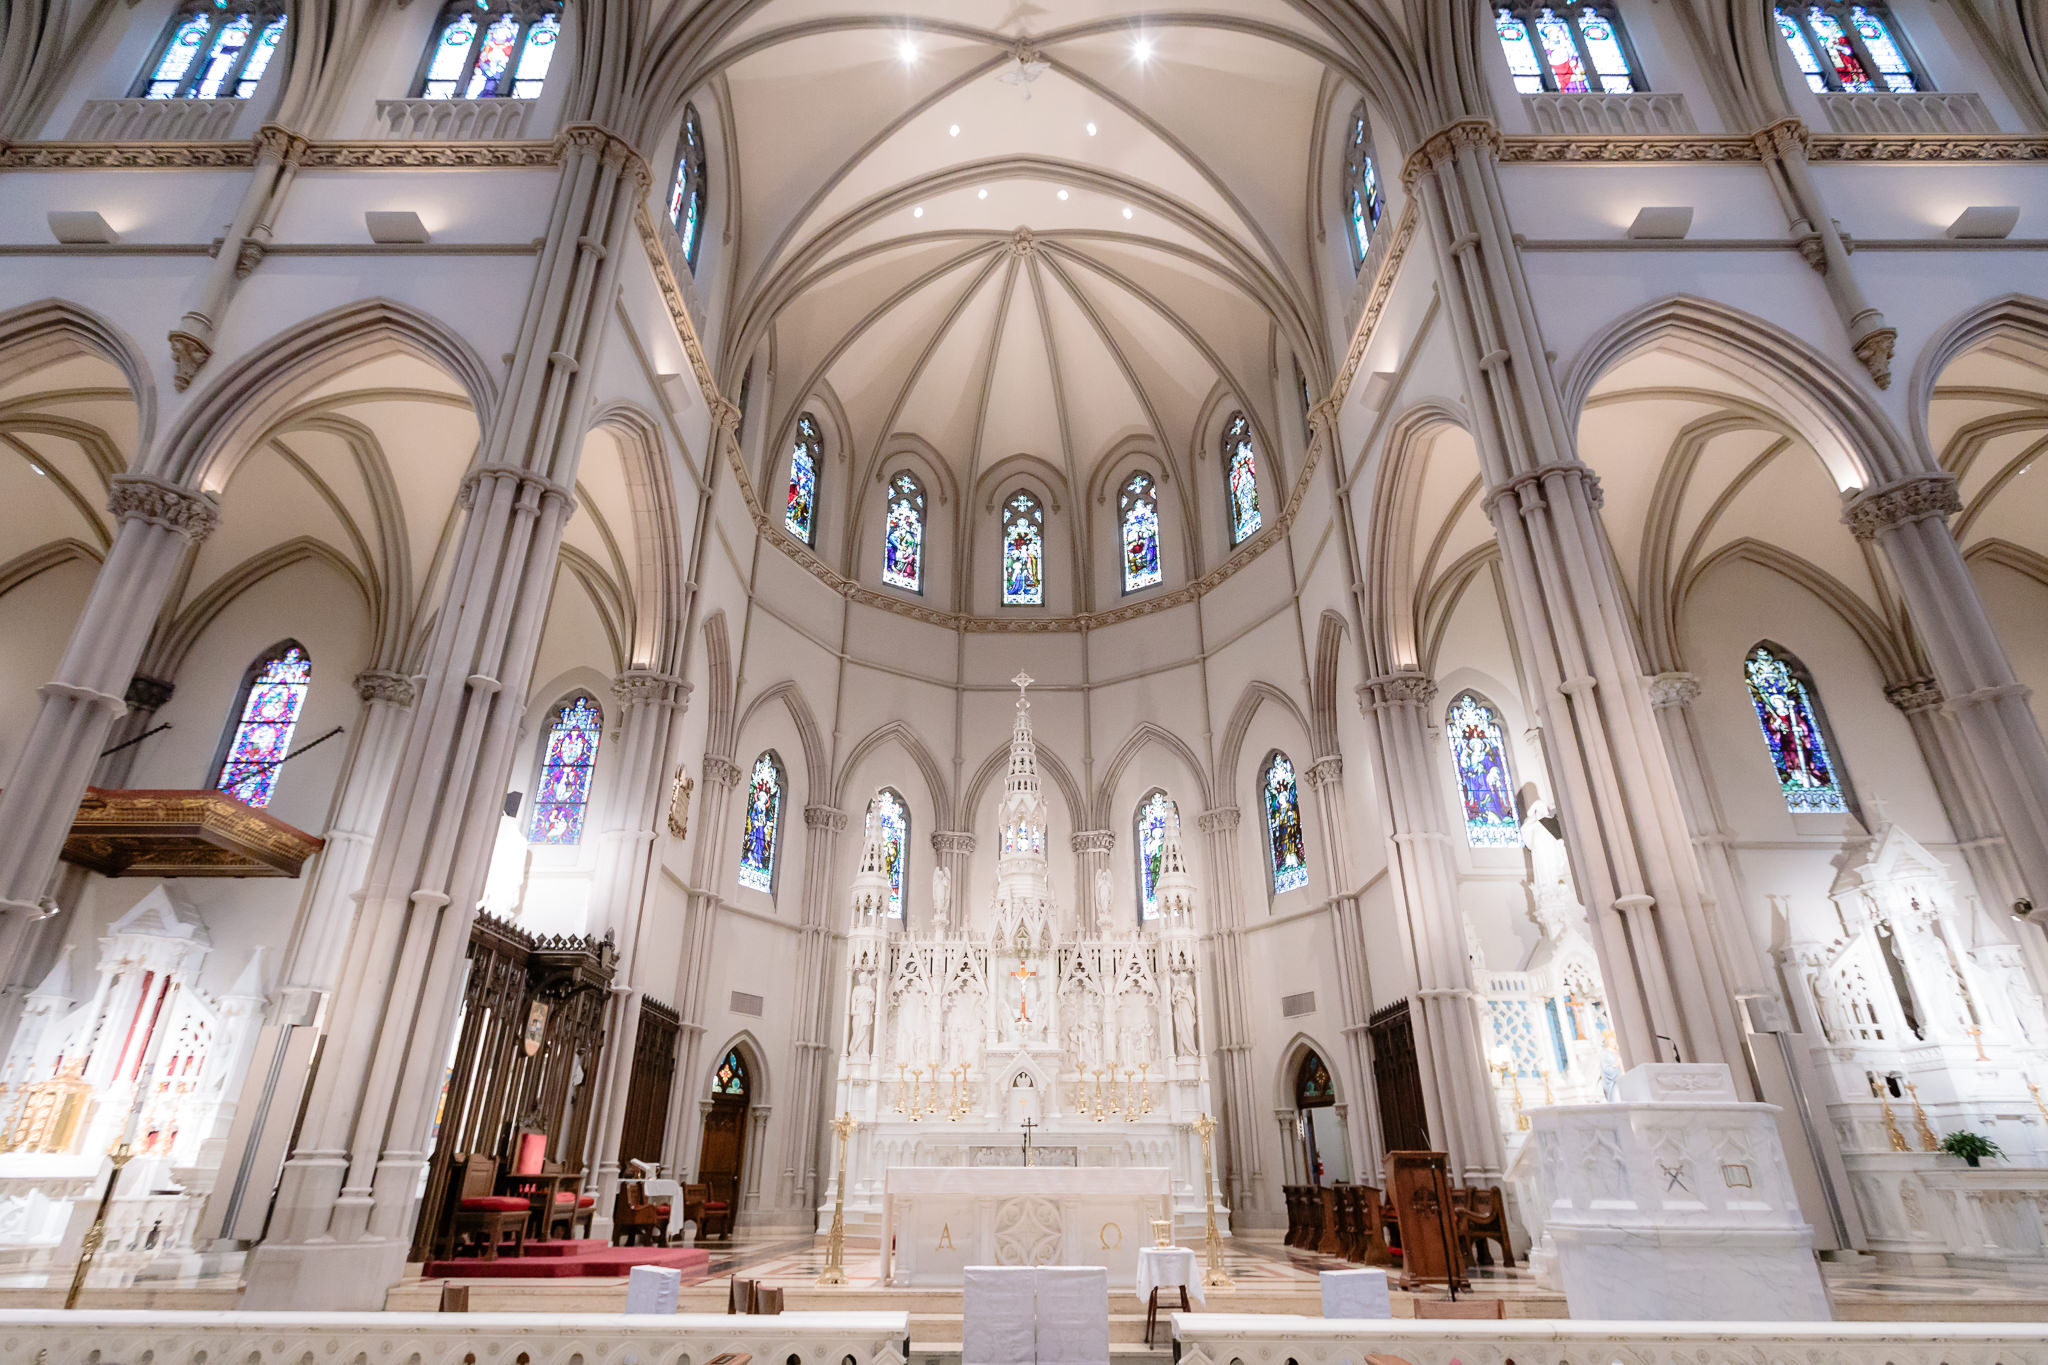 The altar of Saint Paul Cathedral in Pittsburgh, PA